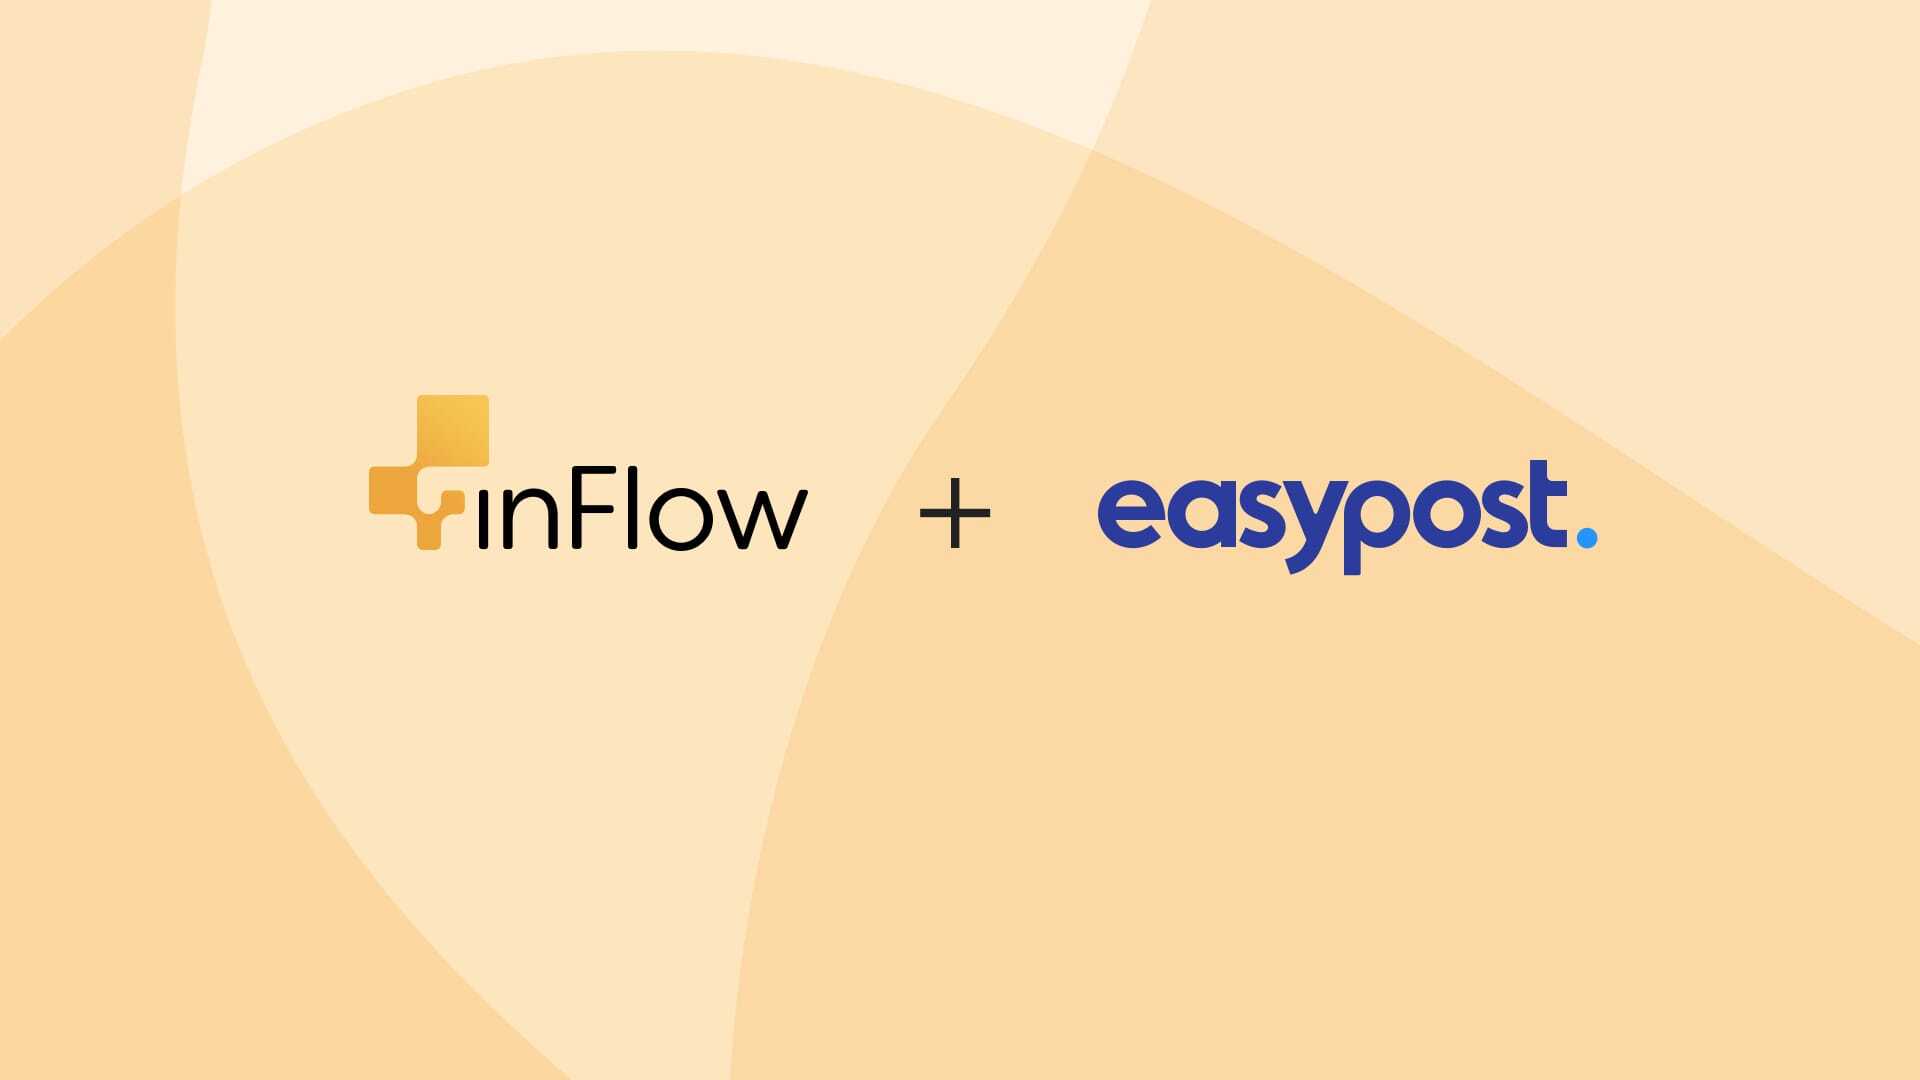 inFlow Inventory + EasyPost offer an integrated pick, pack, and ship solution